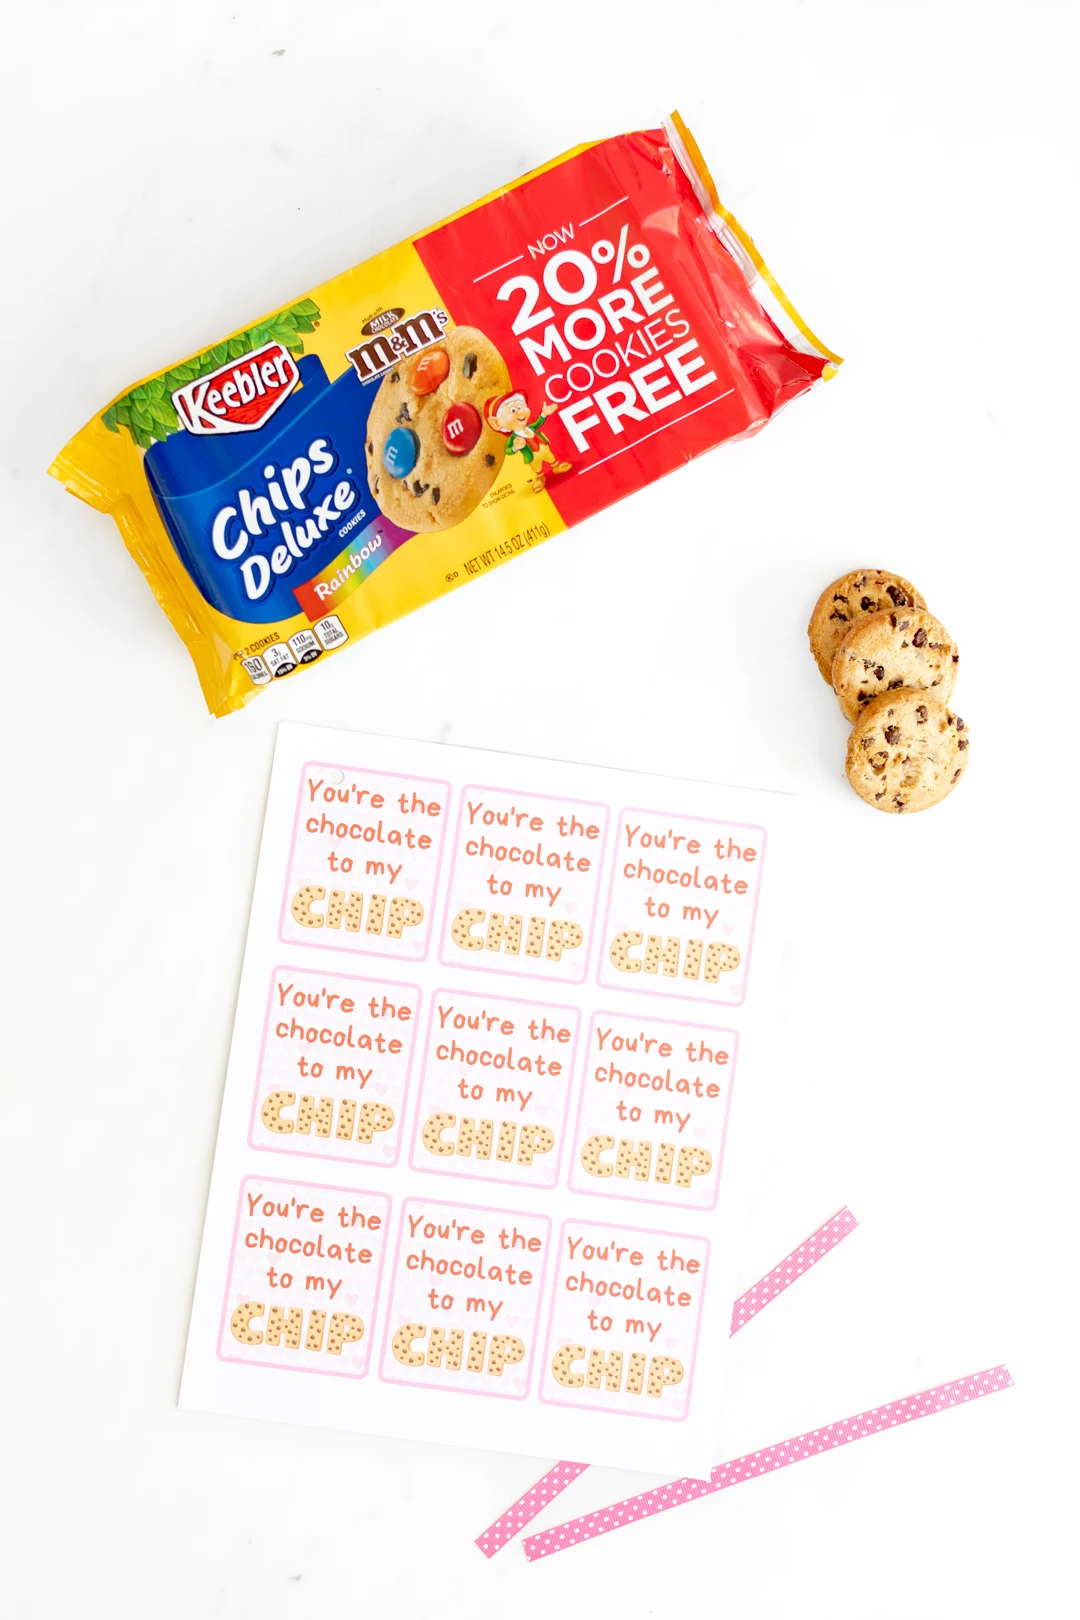 Printable Valentine Cards and pack of cookies